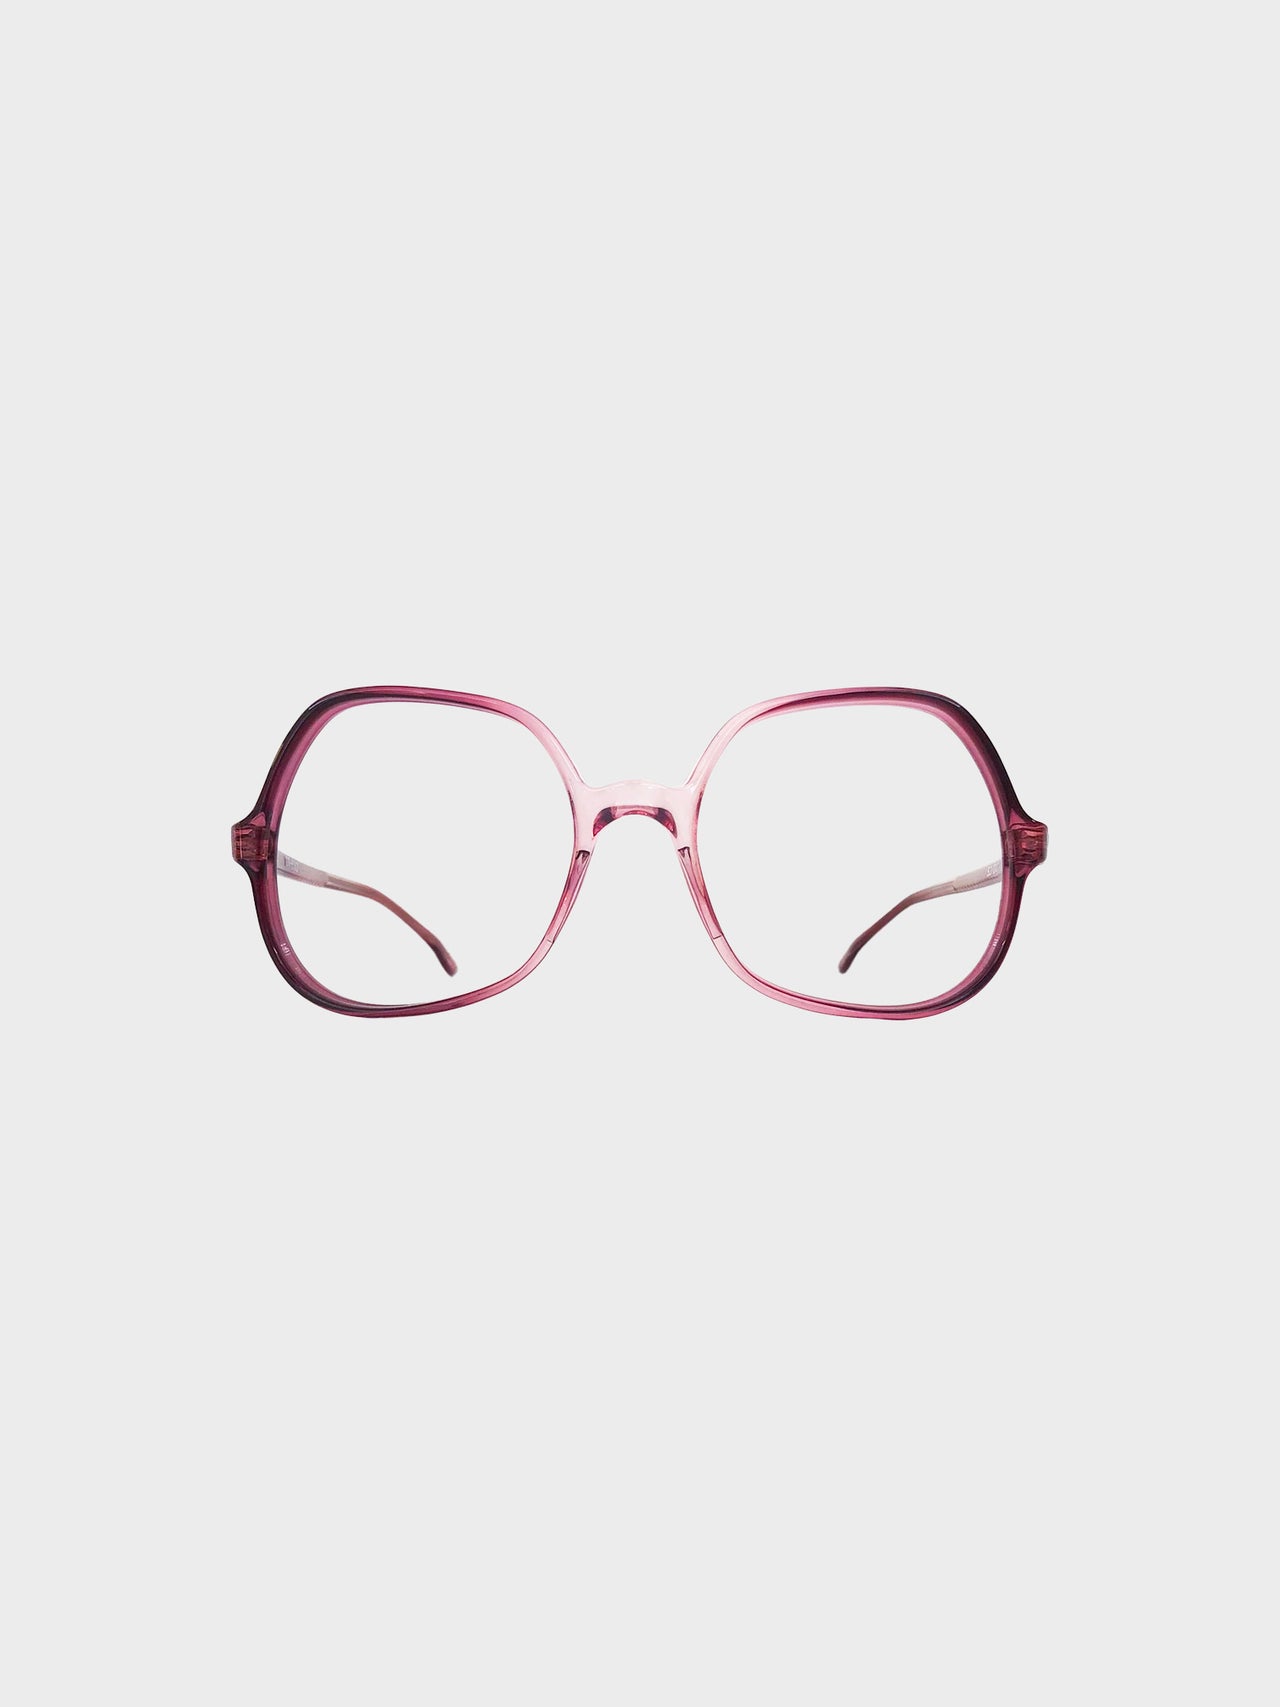 FRENCH VINTAGE / Clear glasses (PURPLE RED) #FV20